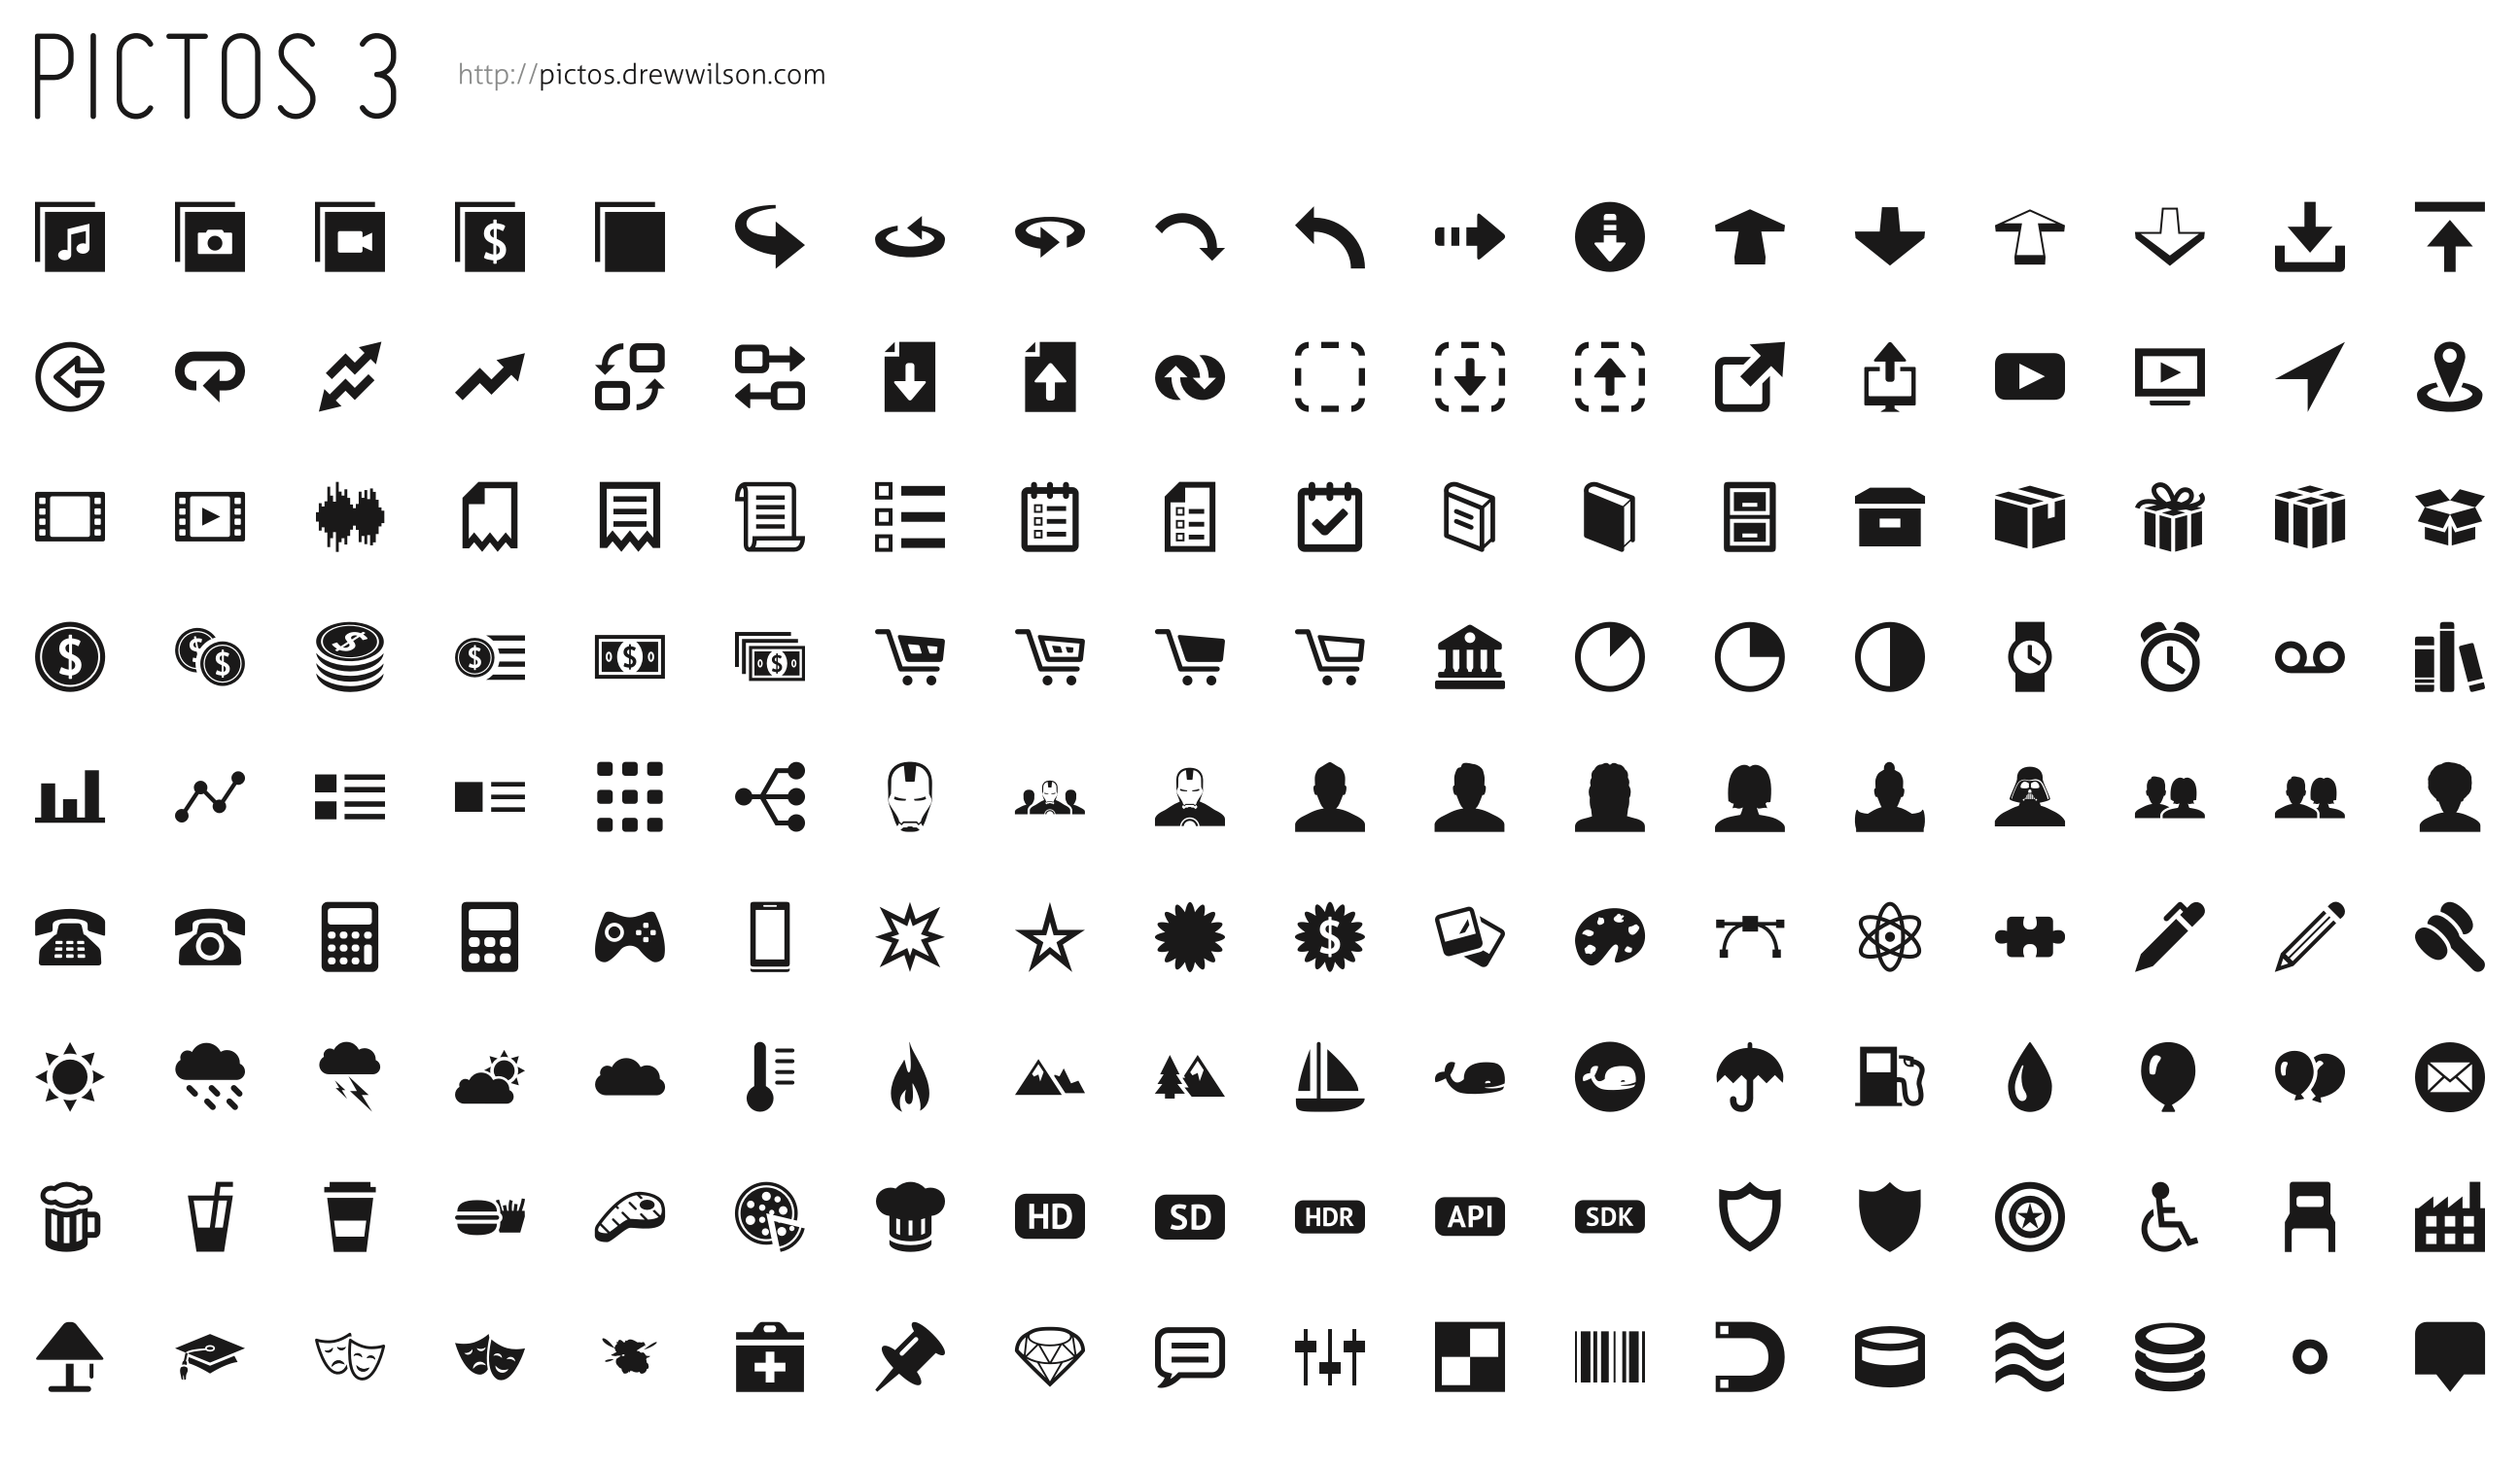 Weather Icon Set 87 free icons (SVG, EPS, PSD, PNG files)